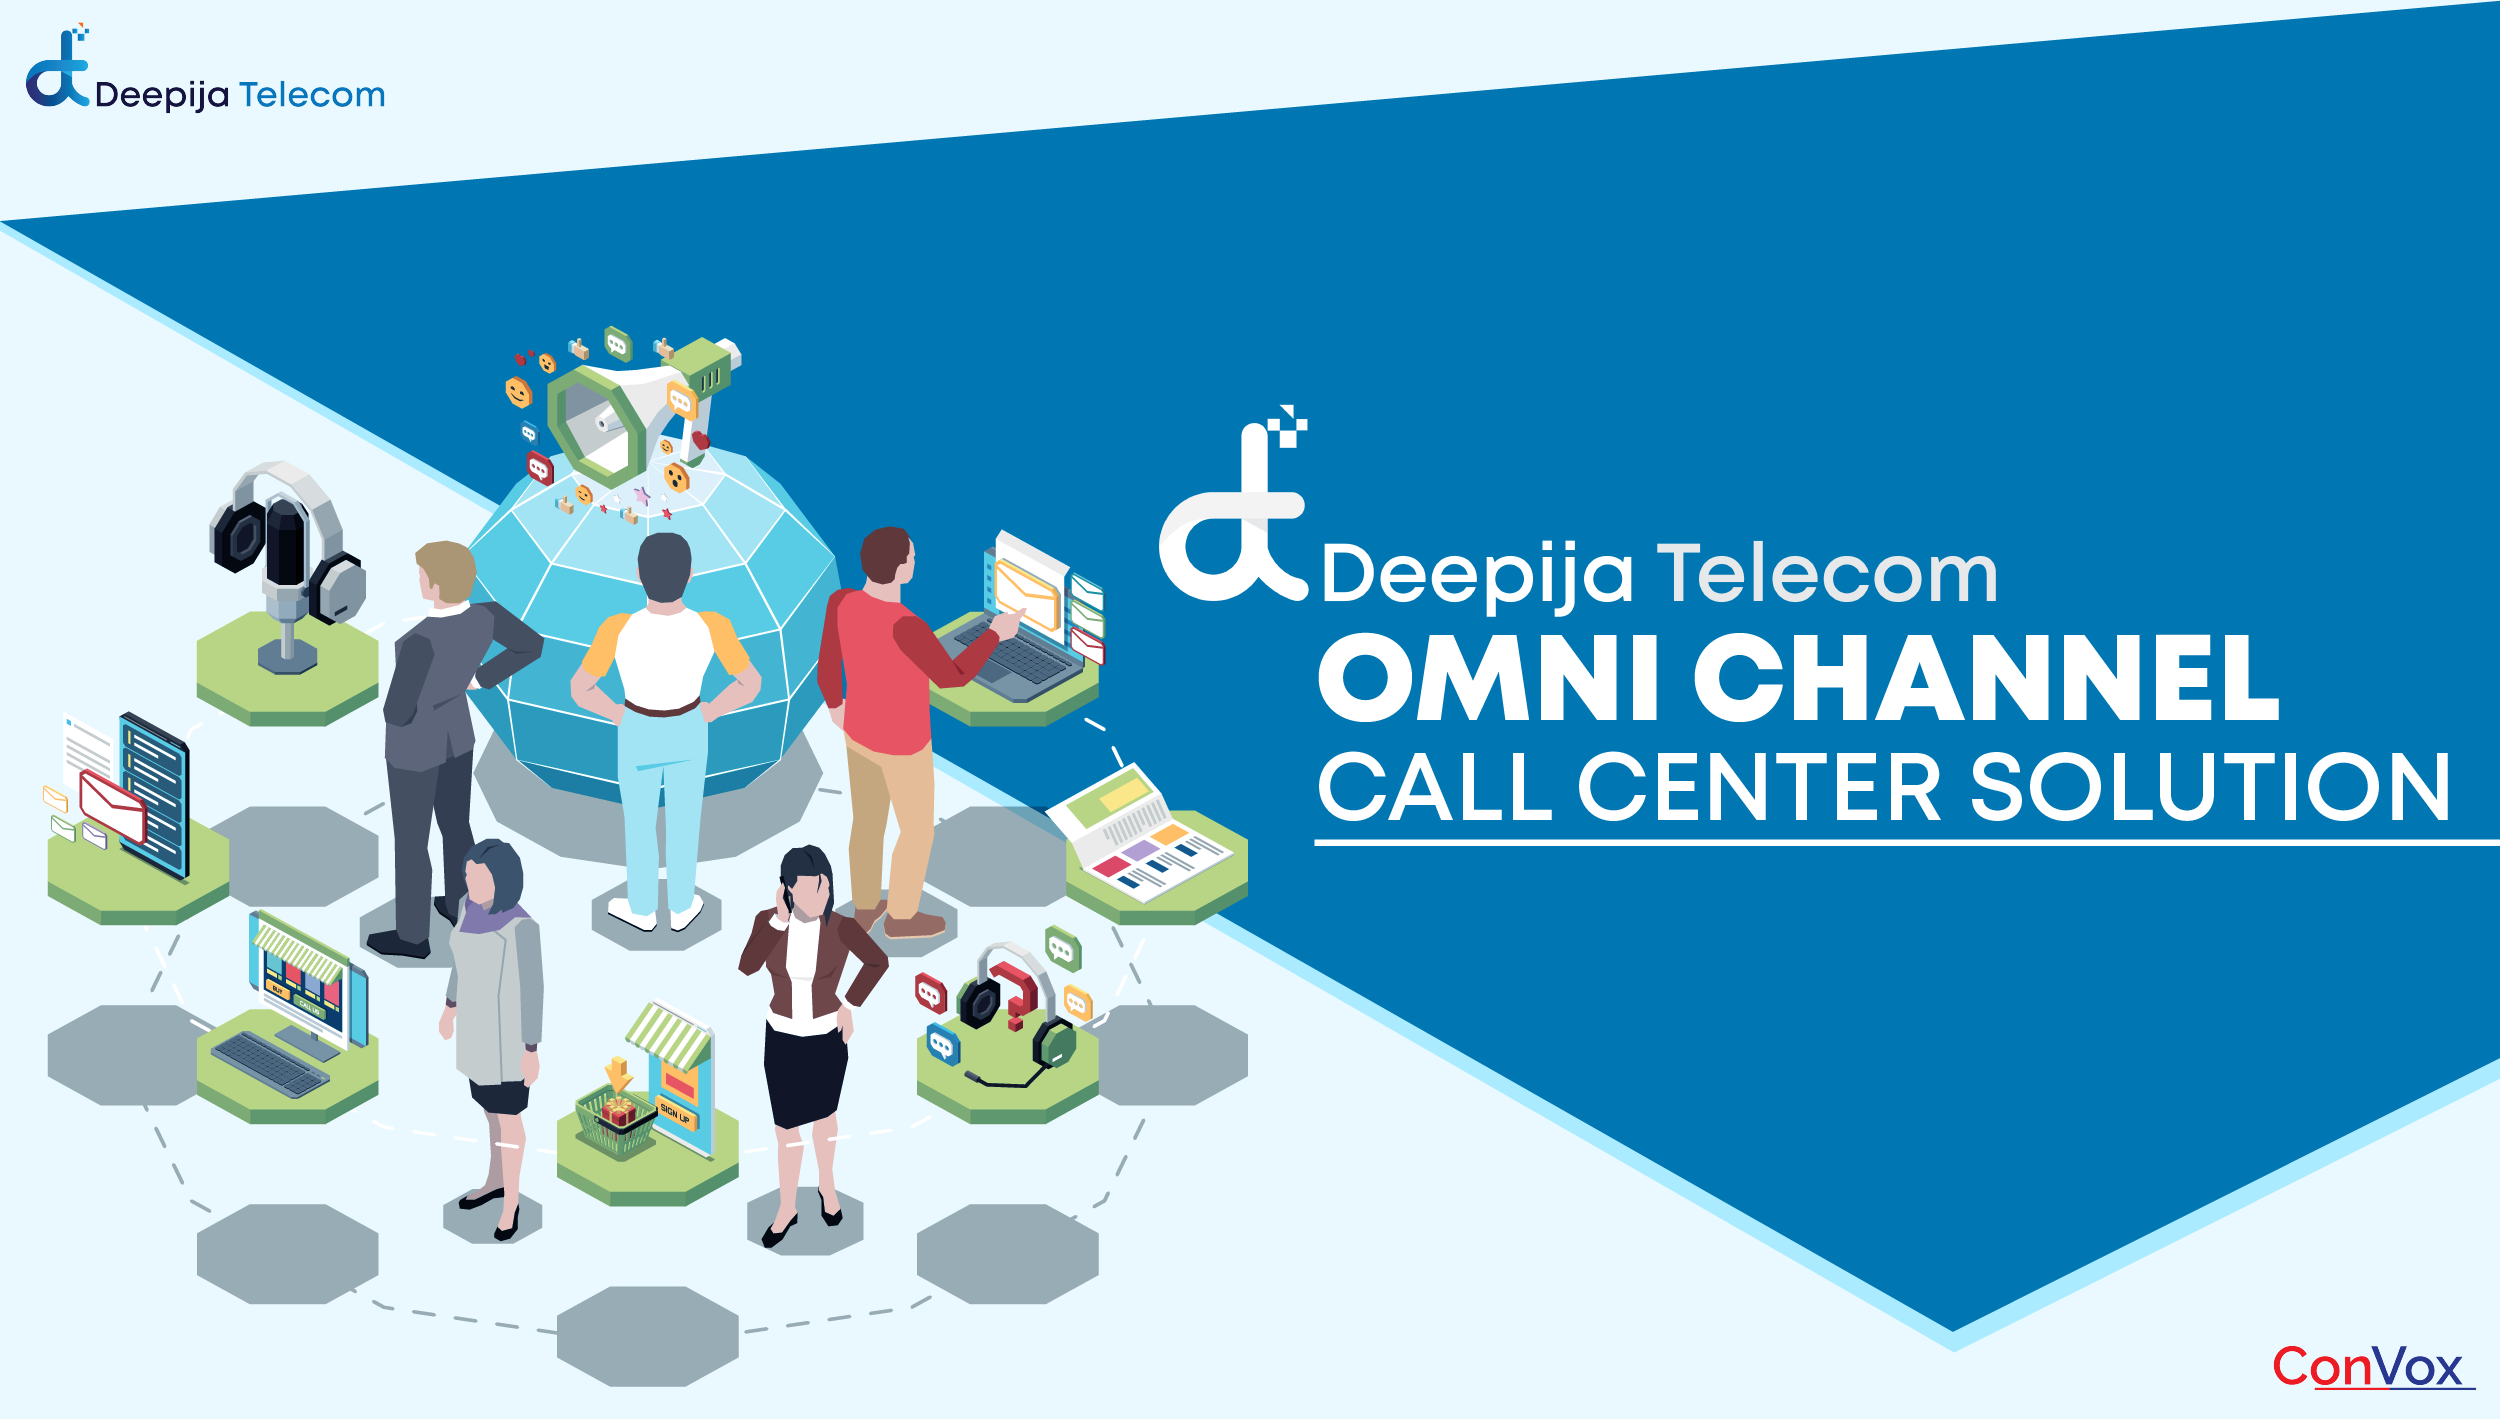 Omni Channel Contact Center Solution featured image